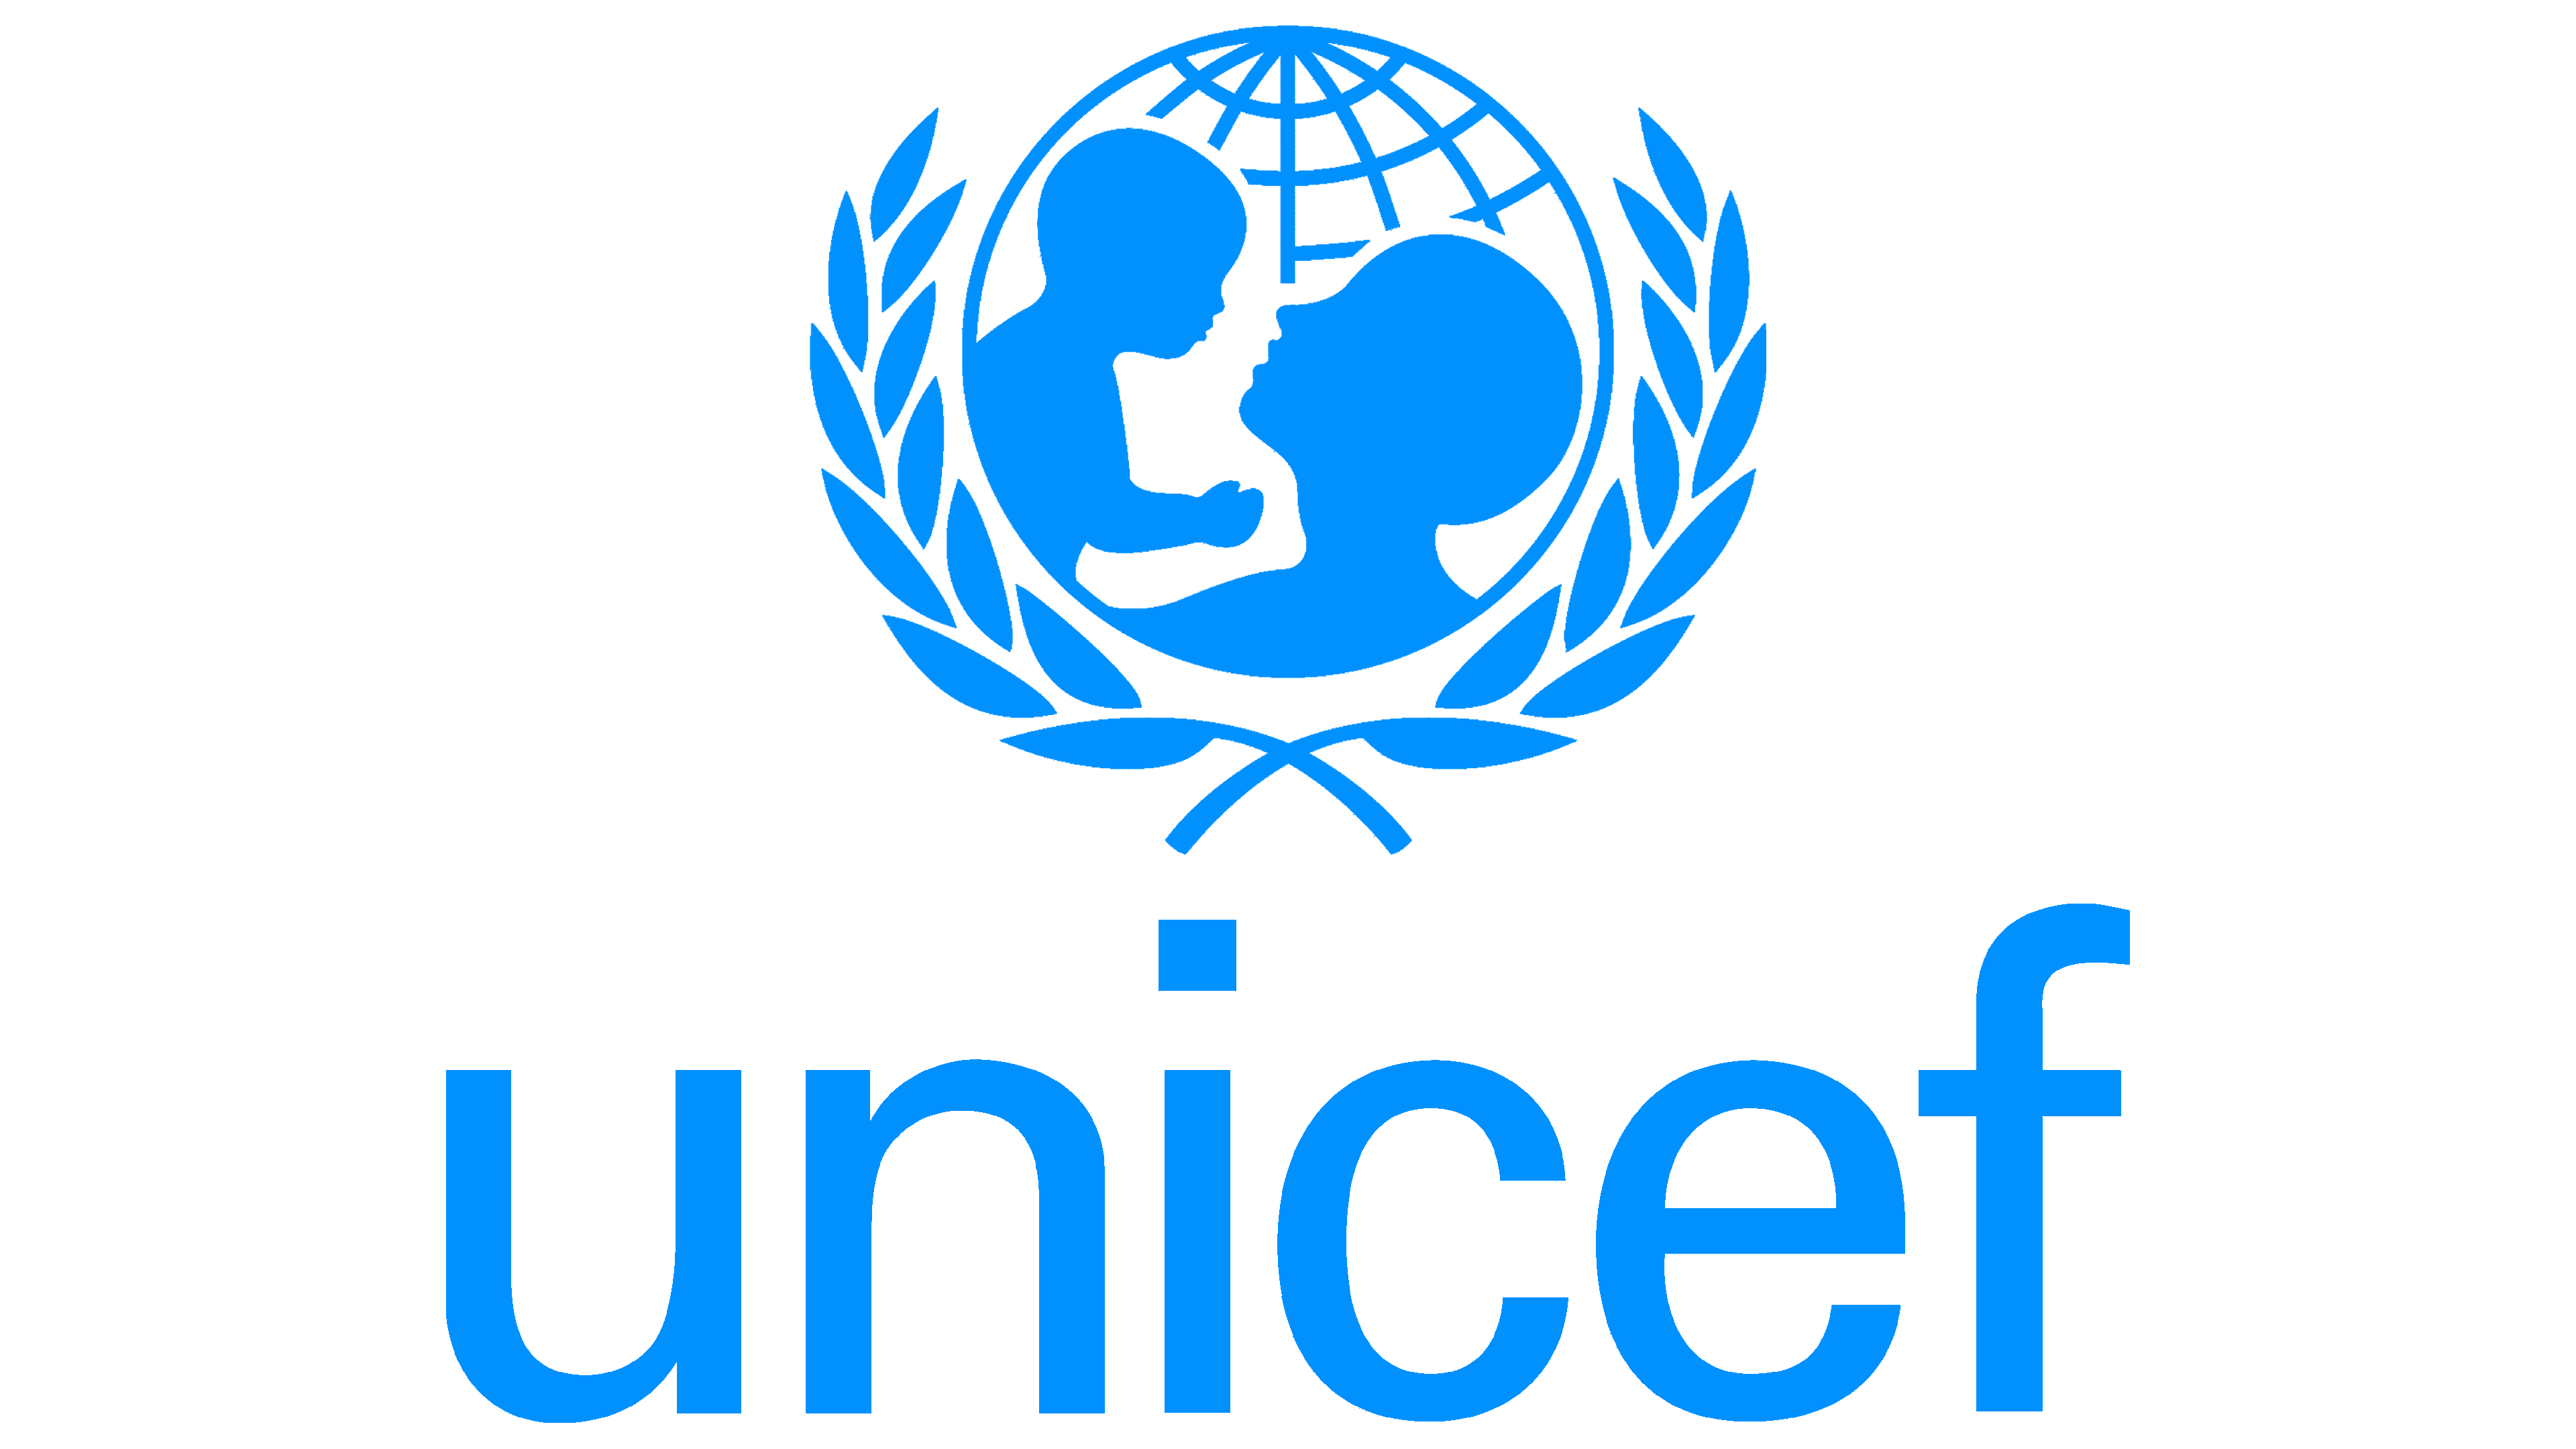 Unicef meaning